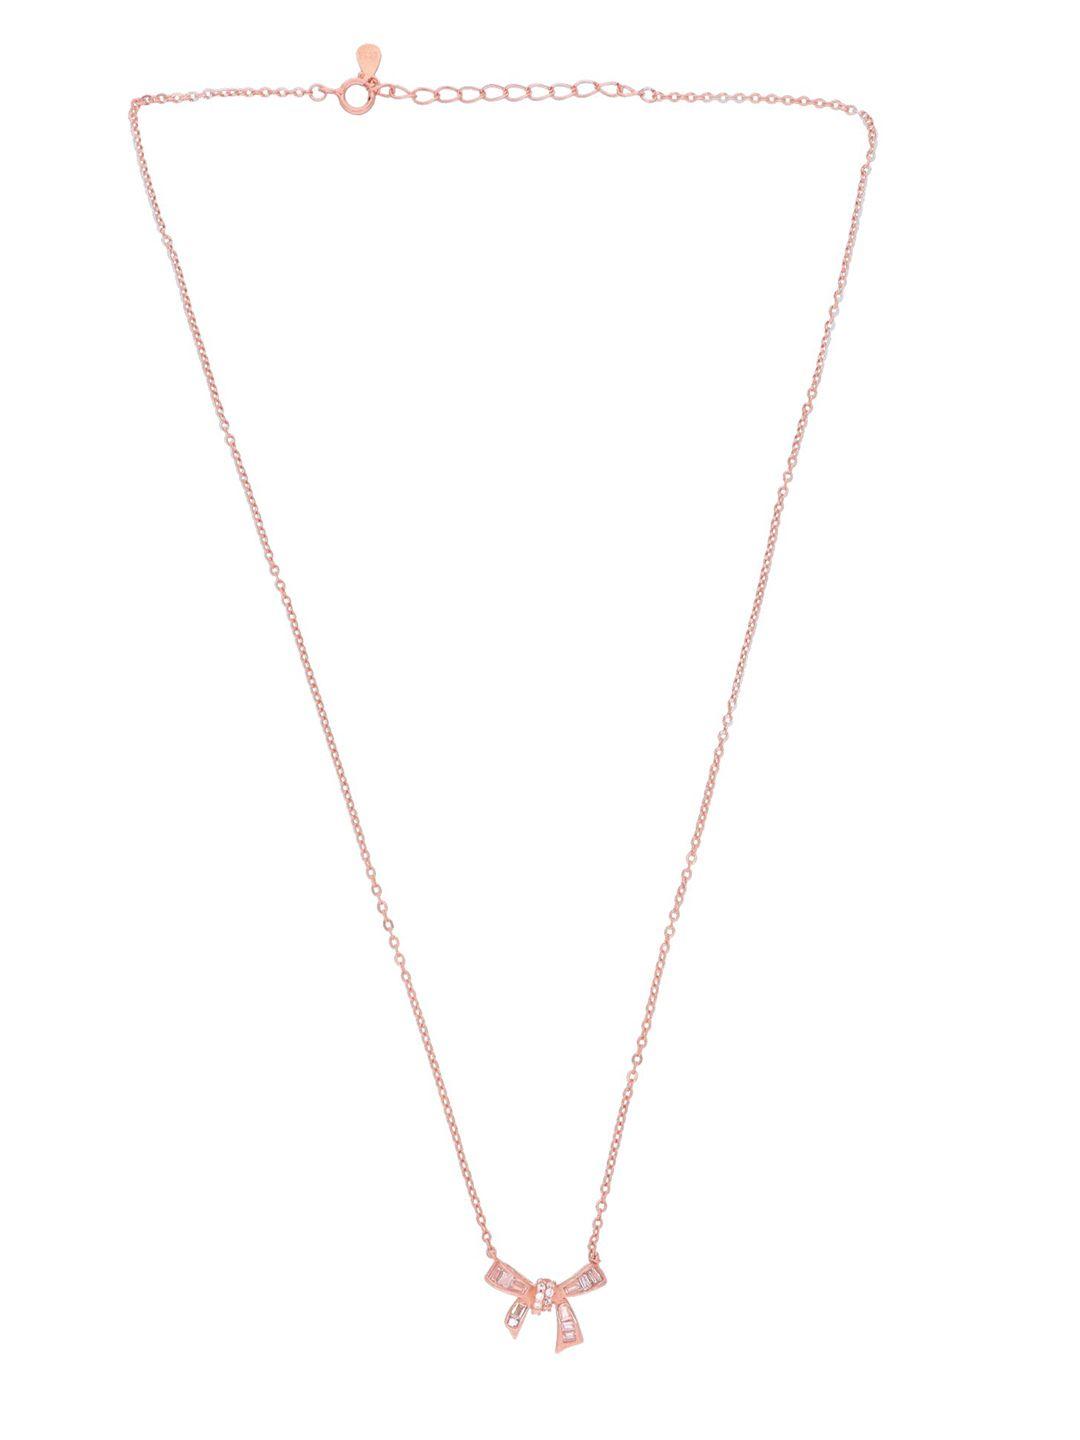 curio cottage pure silver rose gold-plated chain